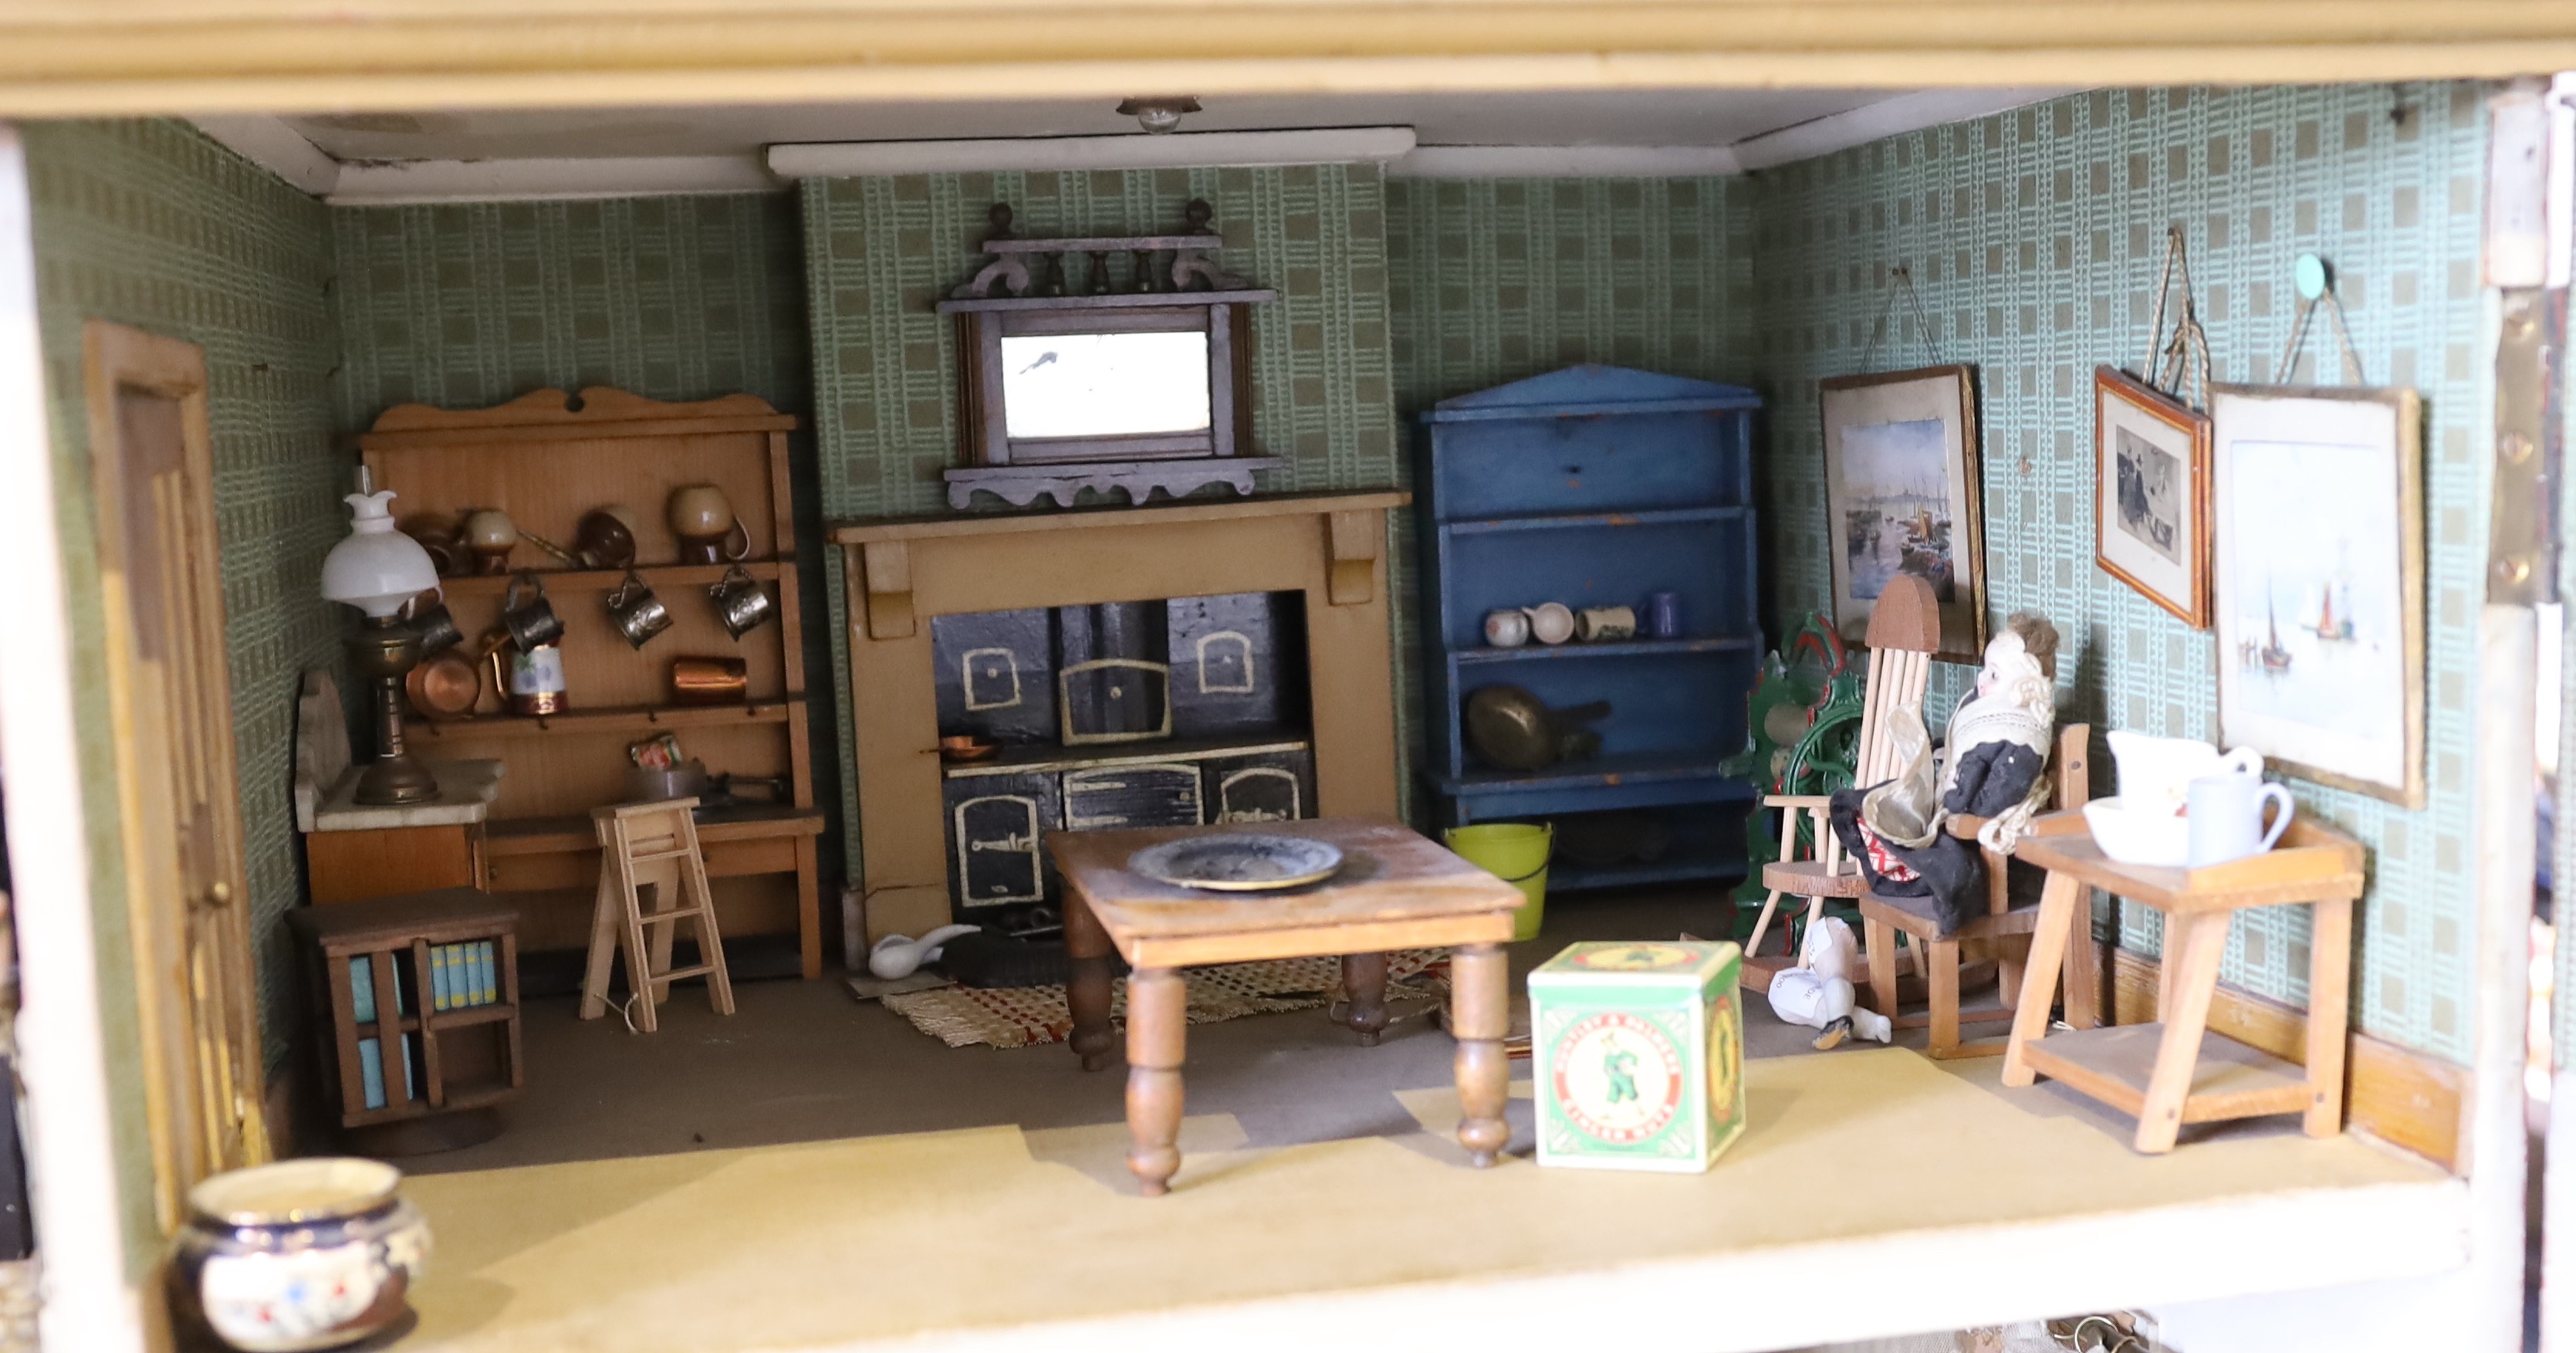 'Ednaville': A fine fully furnished Victorian dolls' house, circa 1880-1900